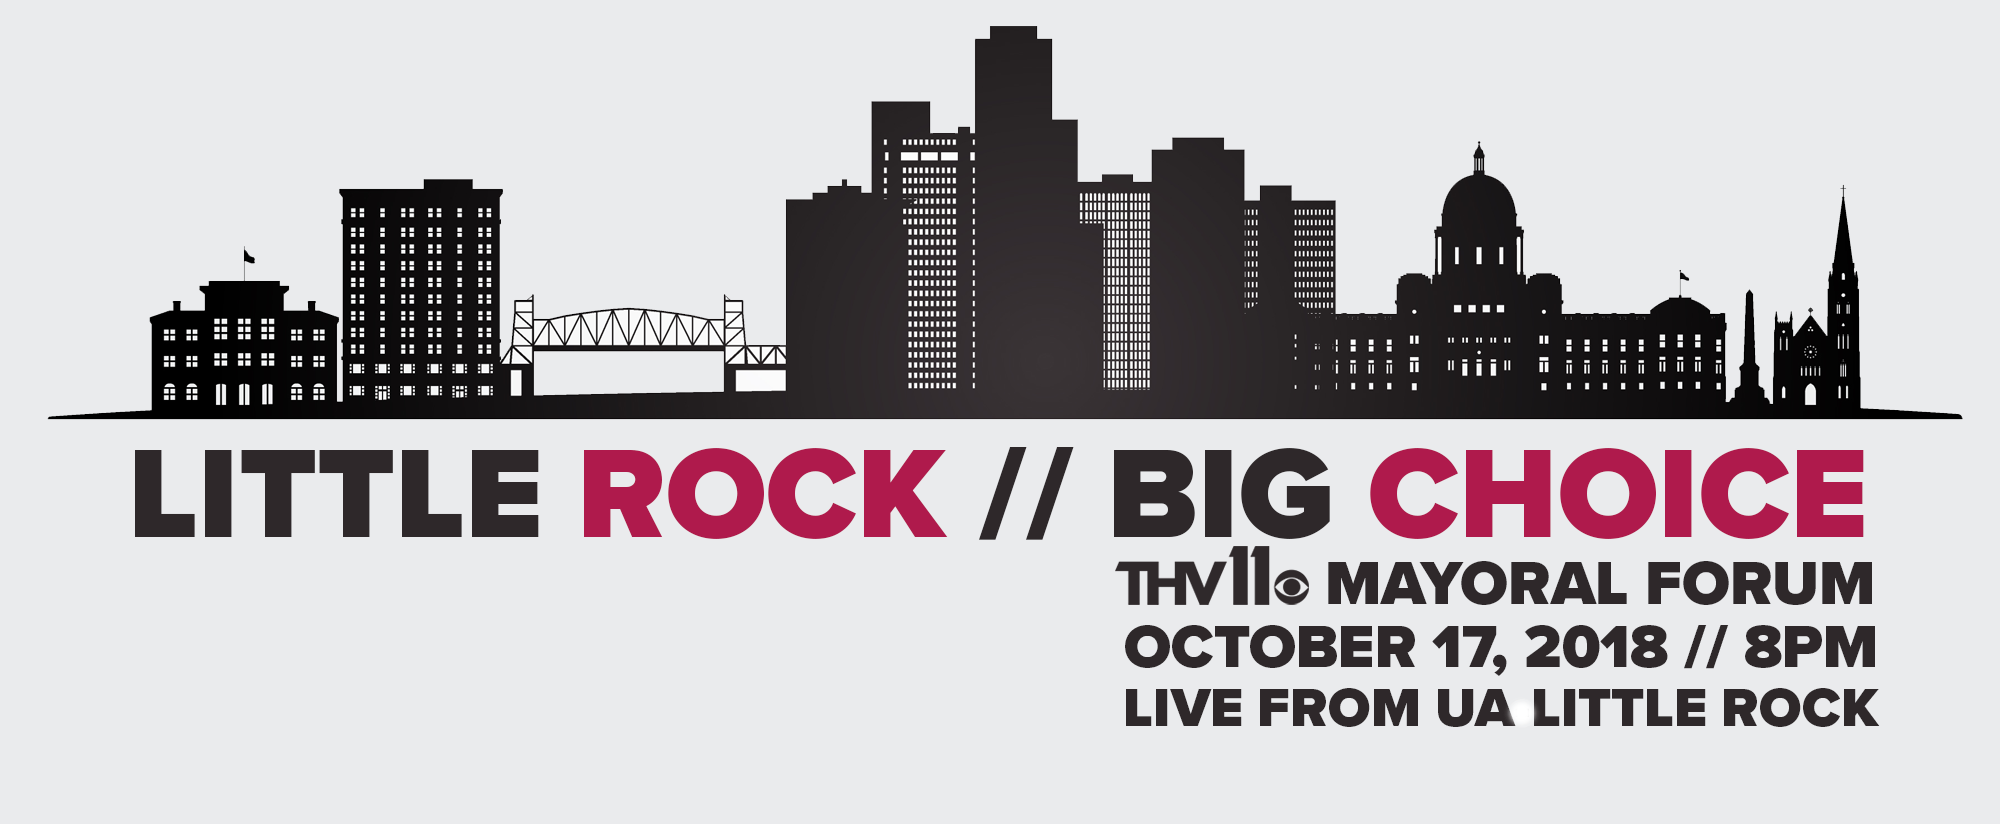 The University of Arkansas at Little Rock is partnering with THV11 to host the “Little Rock, Big Choice” mayoral forum in THV11’s primetime lineup on Wednesday, Oct. 17.